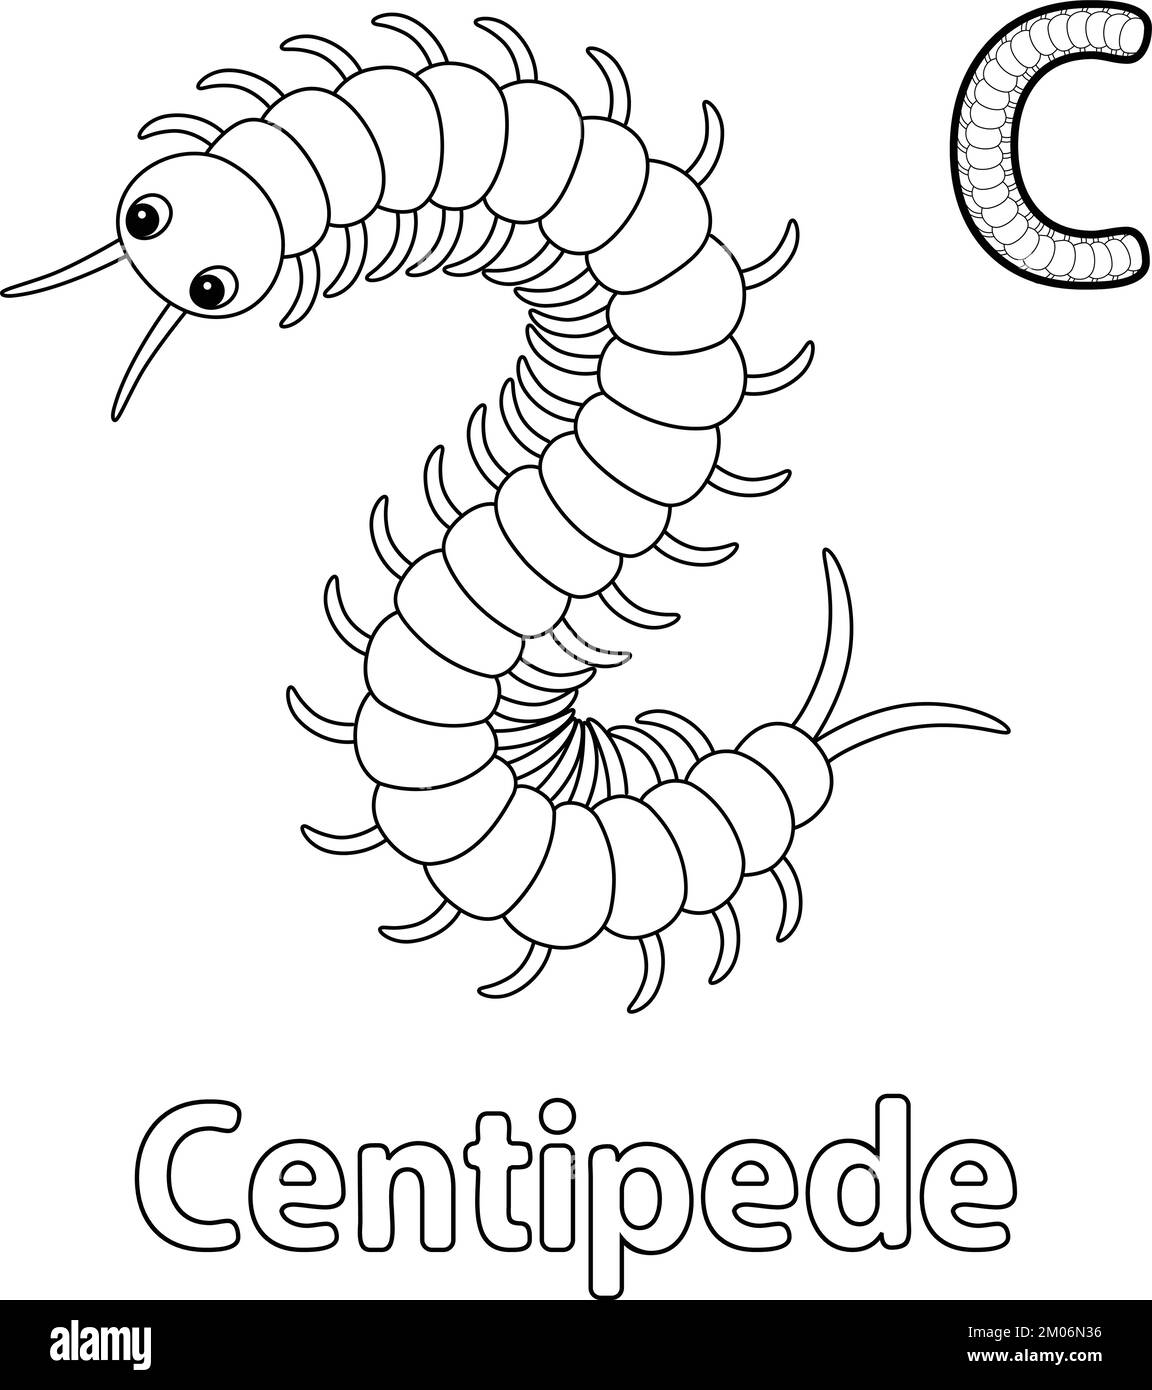 Centipede Animal Alphabet ABC Isolated Coloring C Stock Vector